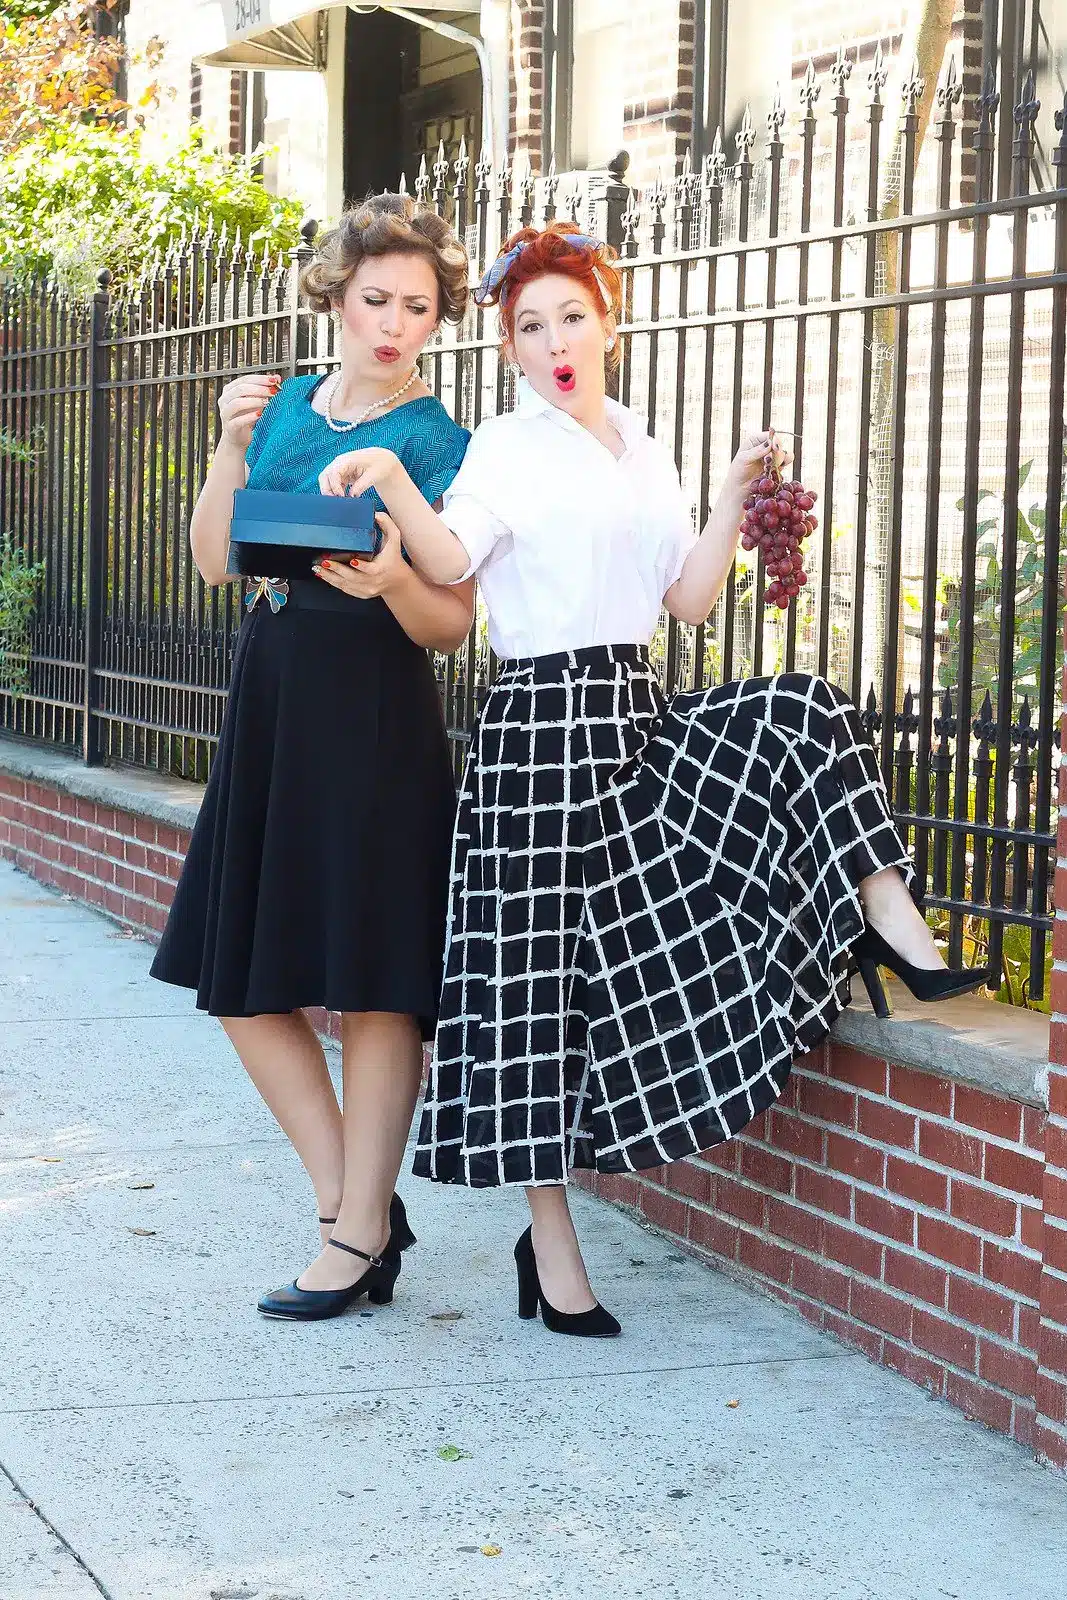 Lucy and Ethel from I Love Lucy costumes